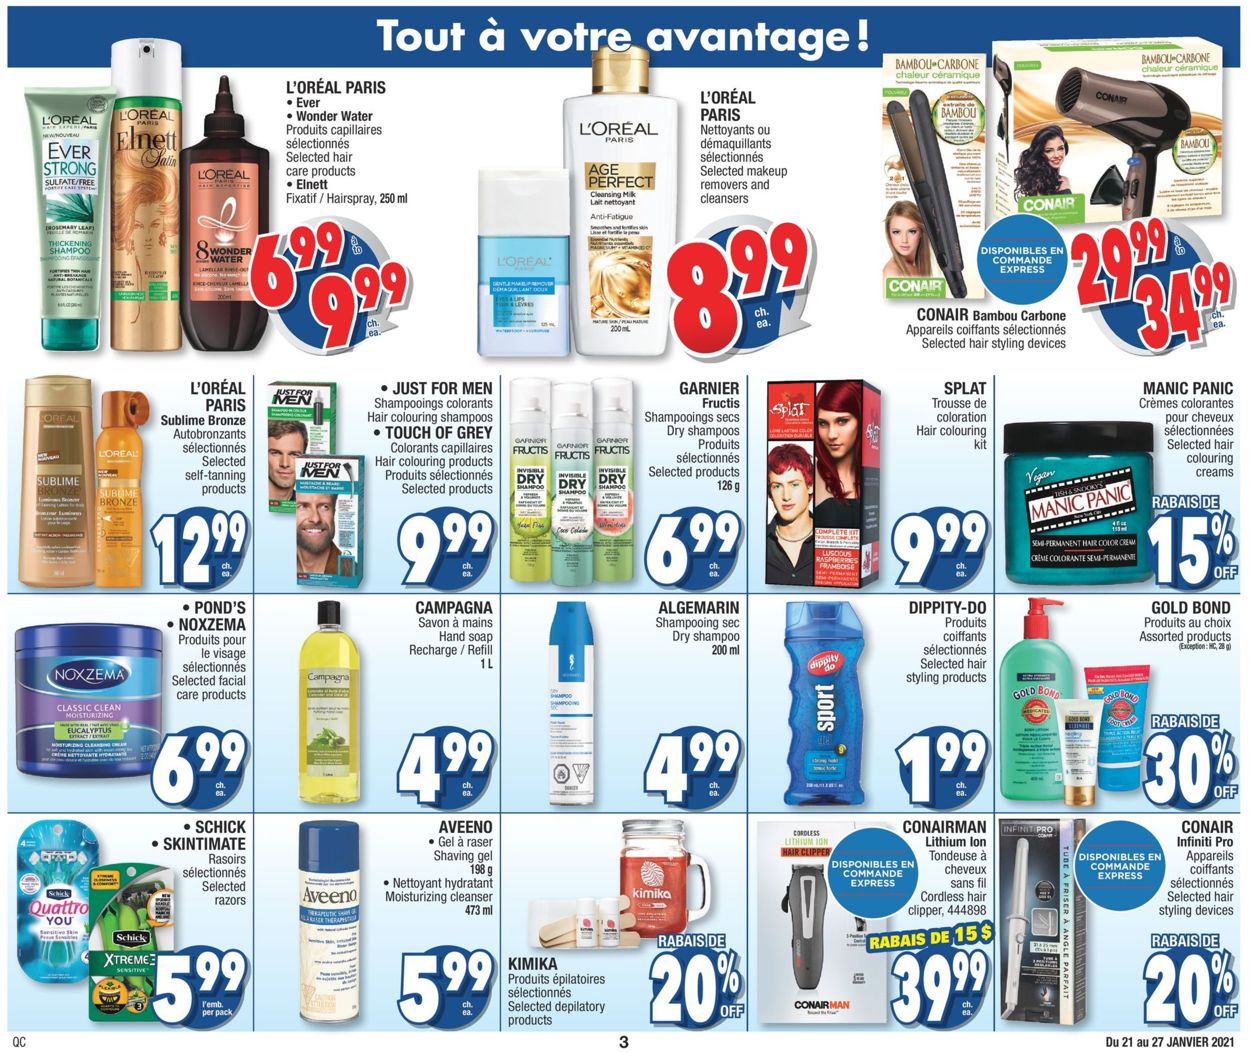 Jean Coutu Flyer - 01/21-01/27/2021 (Page 3)